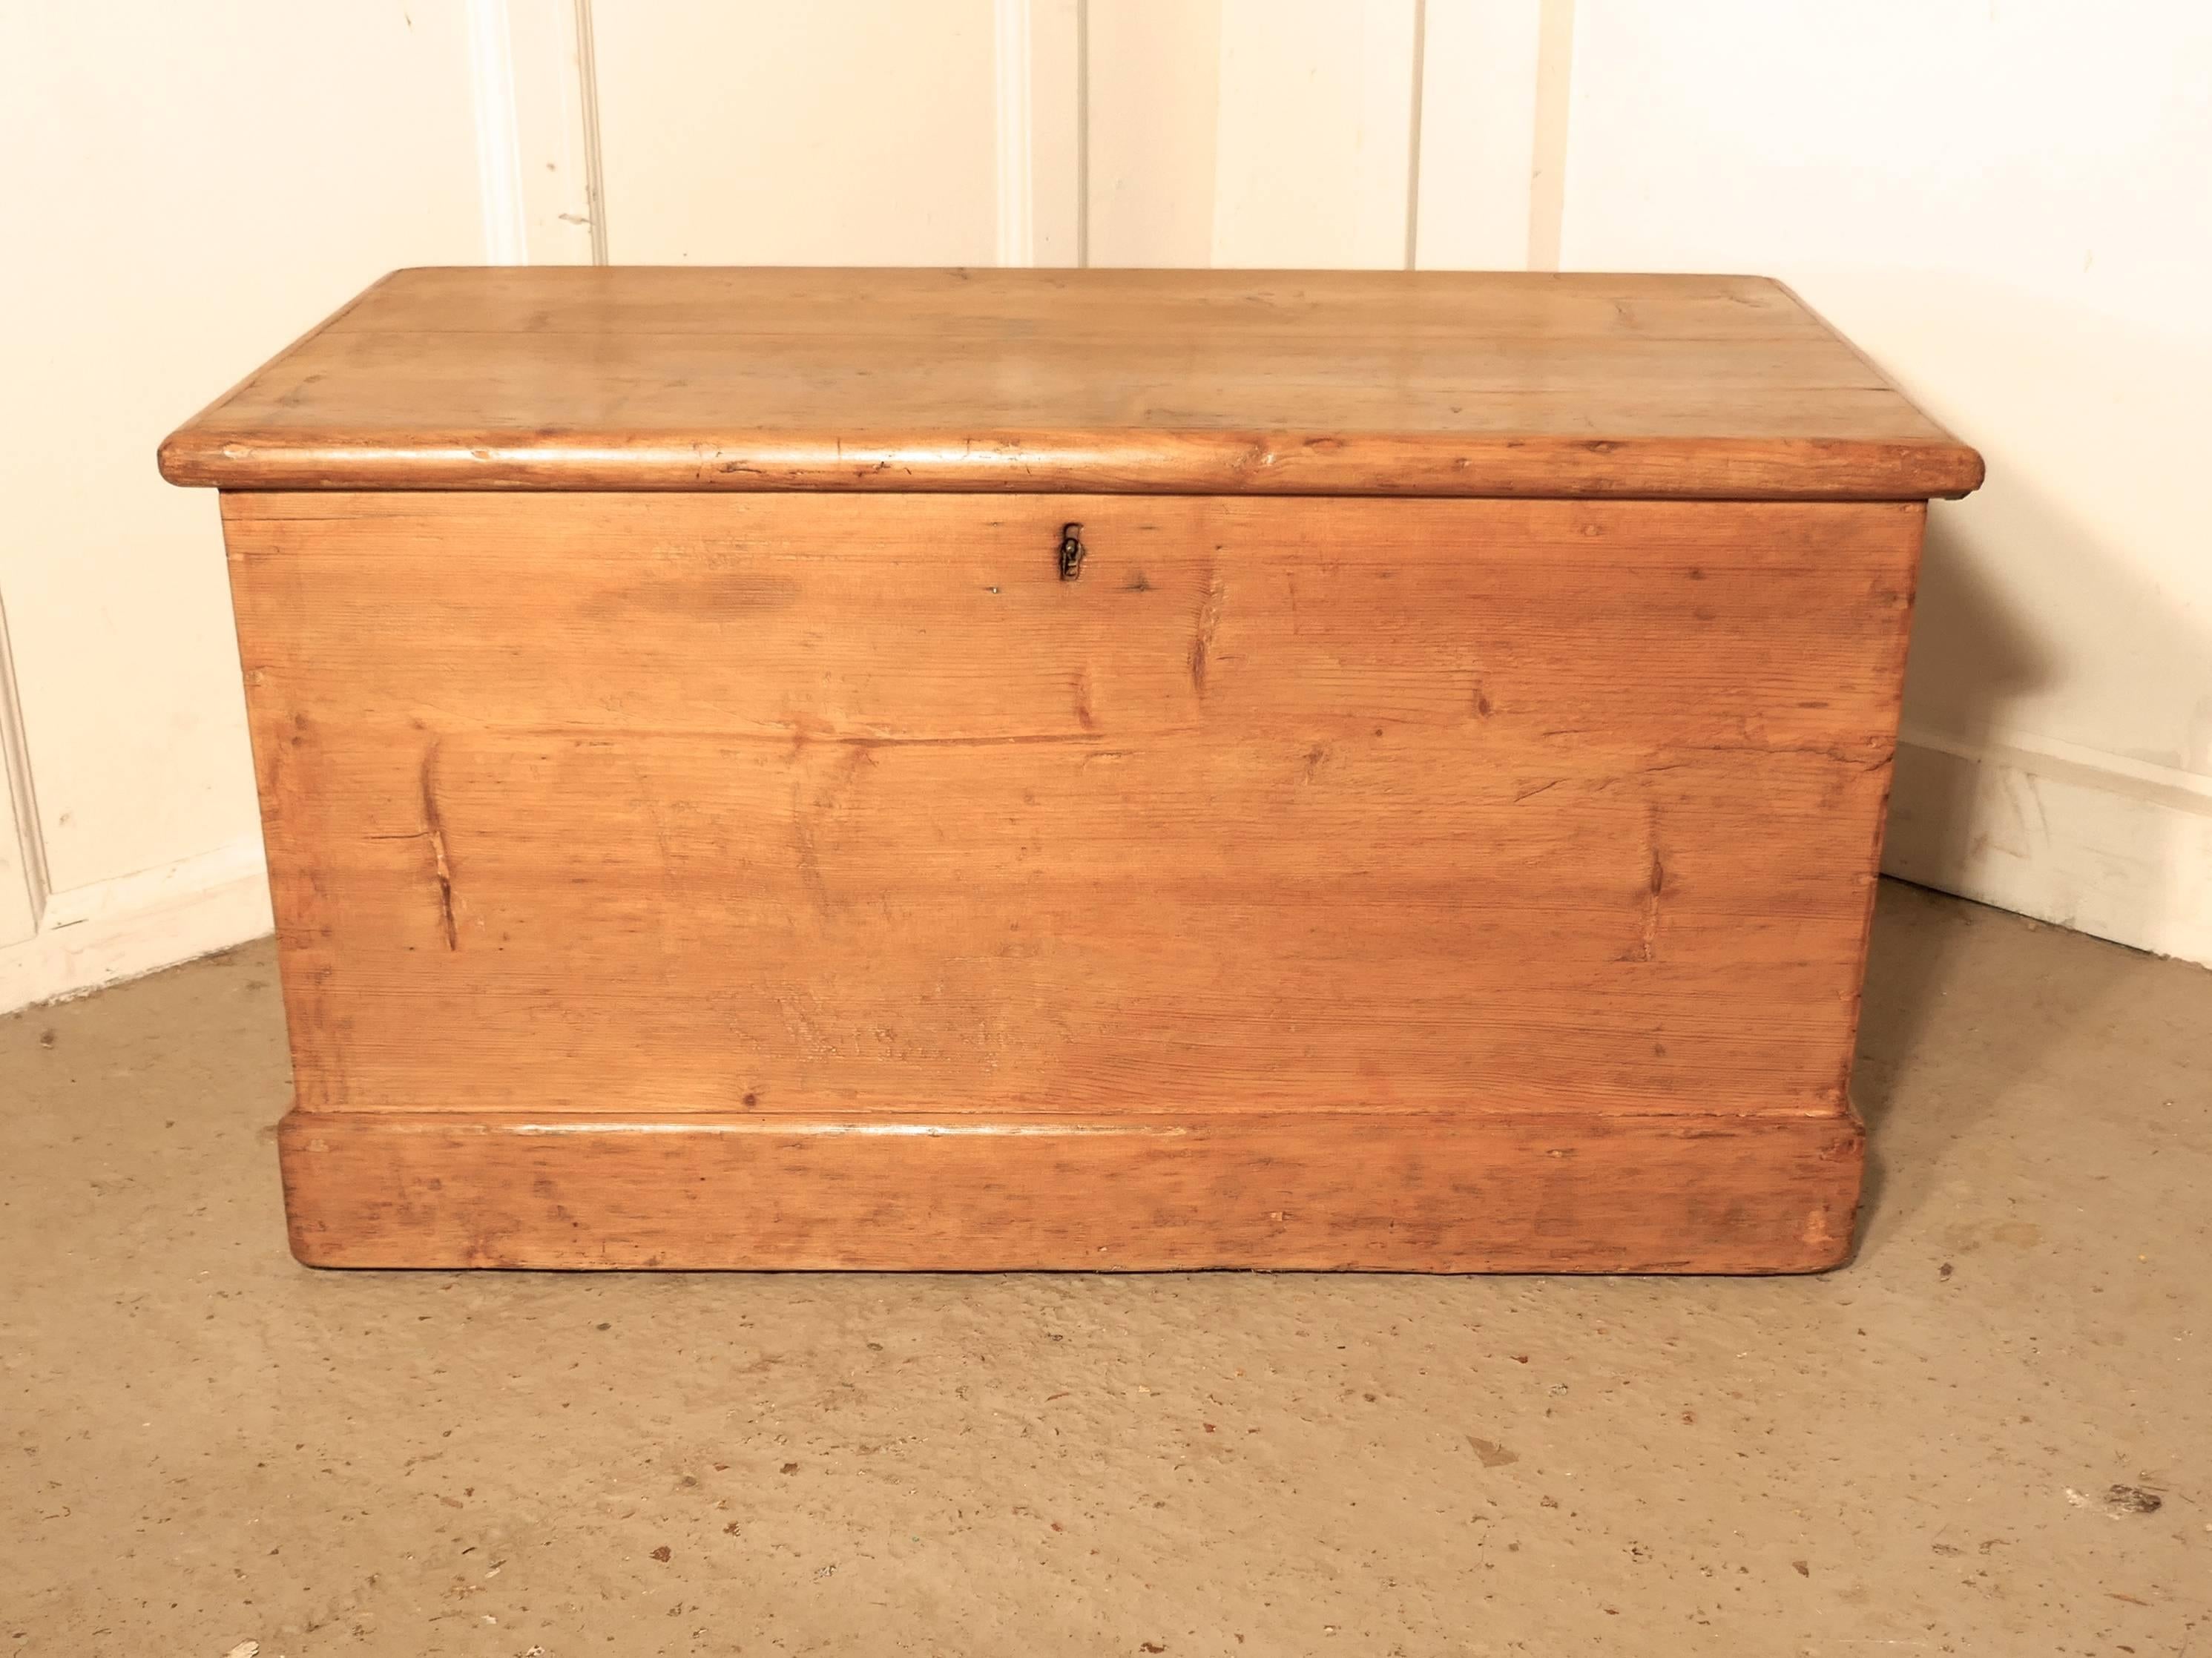 Victorian pine blanket box or coffee table
This is a good quality pine box it has been fully restored, it has a candle box inside and iron carrying handles and it stands on a small plinth 
So a blanket box, a toy chest, shoe box for the hallway